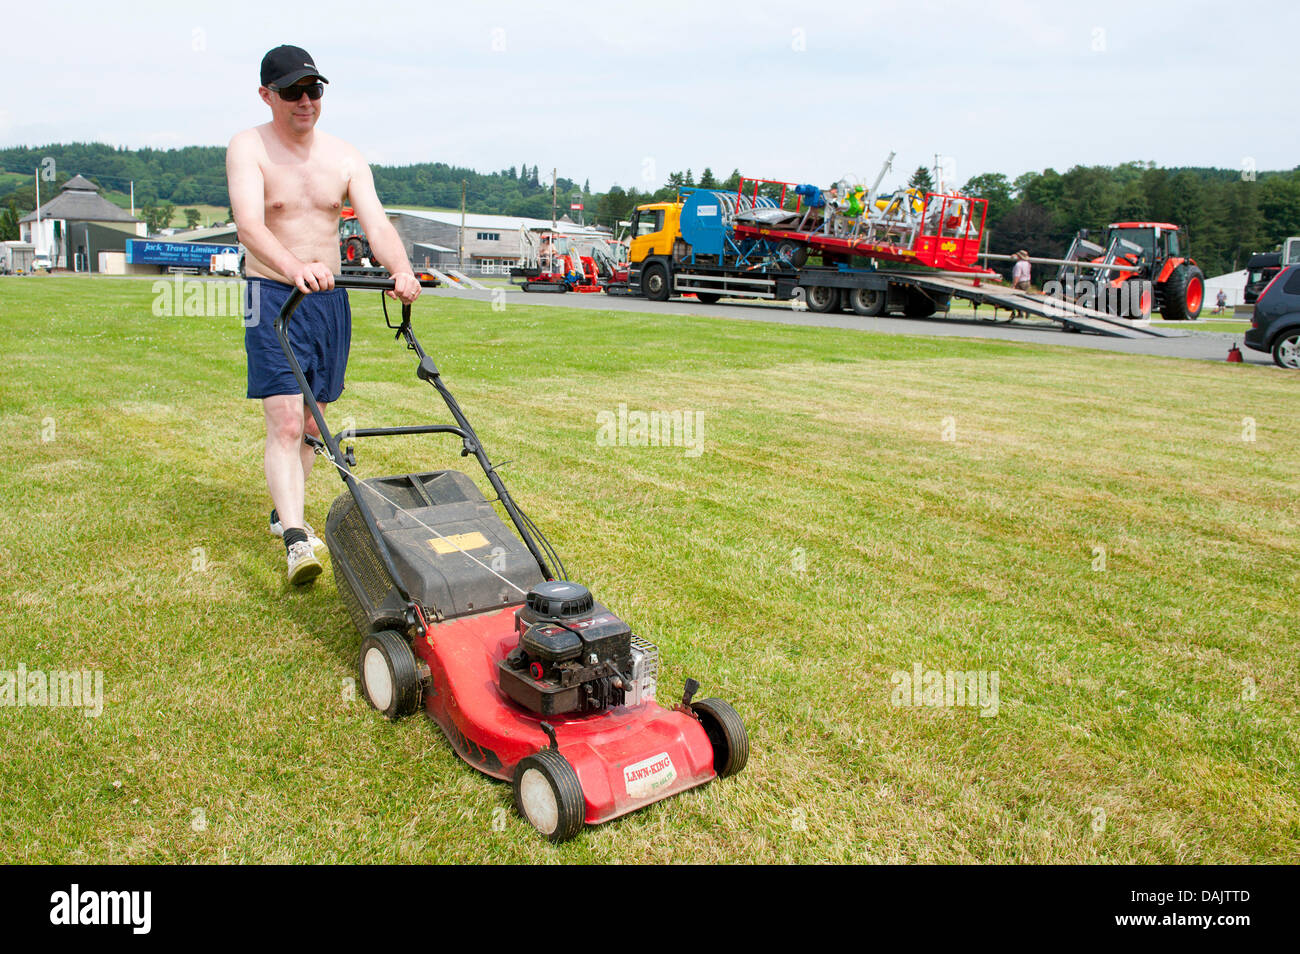 Builth Wells, Mid Wales, UK. 15th July 2013. A workman cuts the grass for a marquee plot. Workmen preparing The Royal Wesh Showground for the start of biggest Agricultural show in Britain next Monday 22nd July 2013 find the heat heavy going as temperatures remain above 30 degrees celsius. Photo credit: Graham M. Lawrence/Alamy Live News. Stock Photo